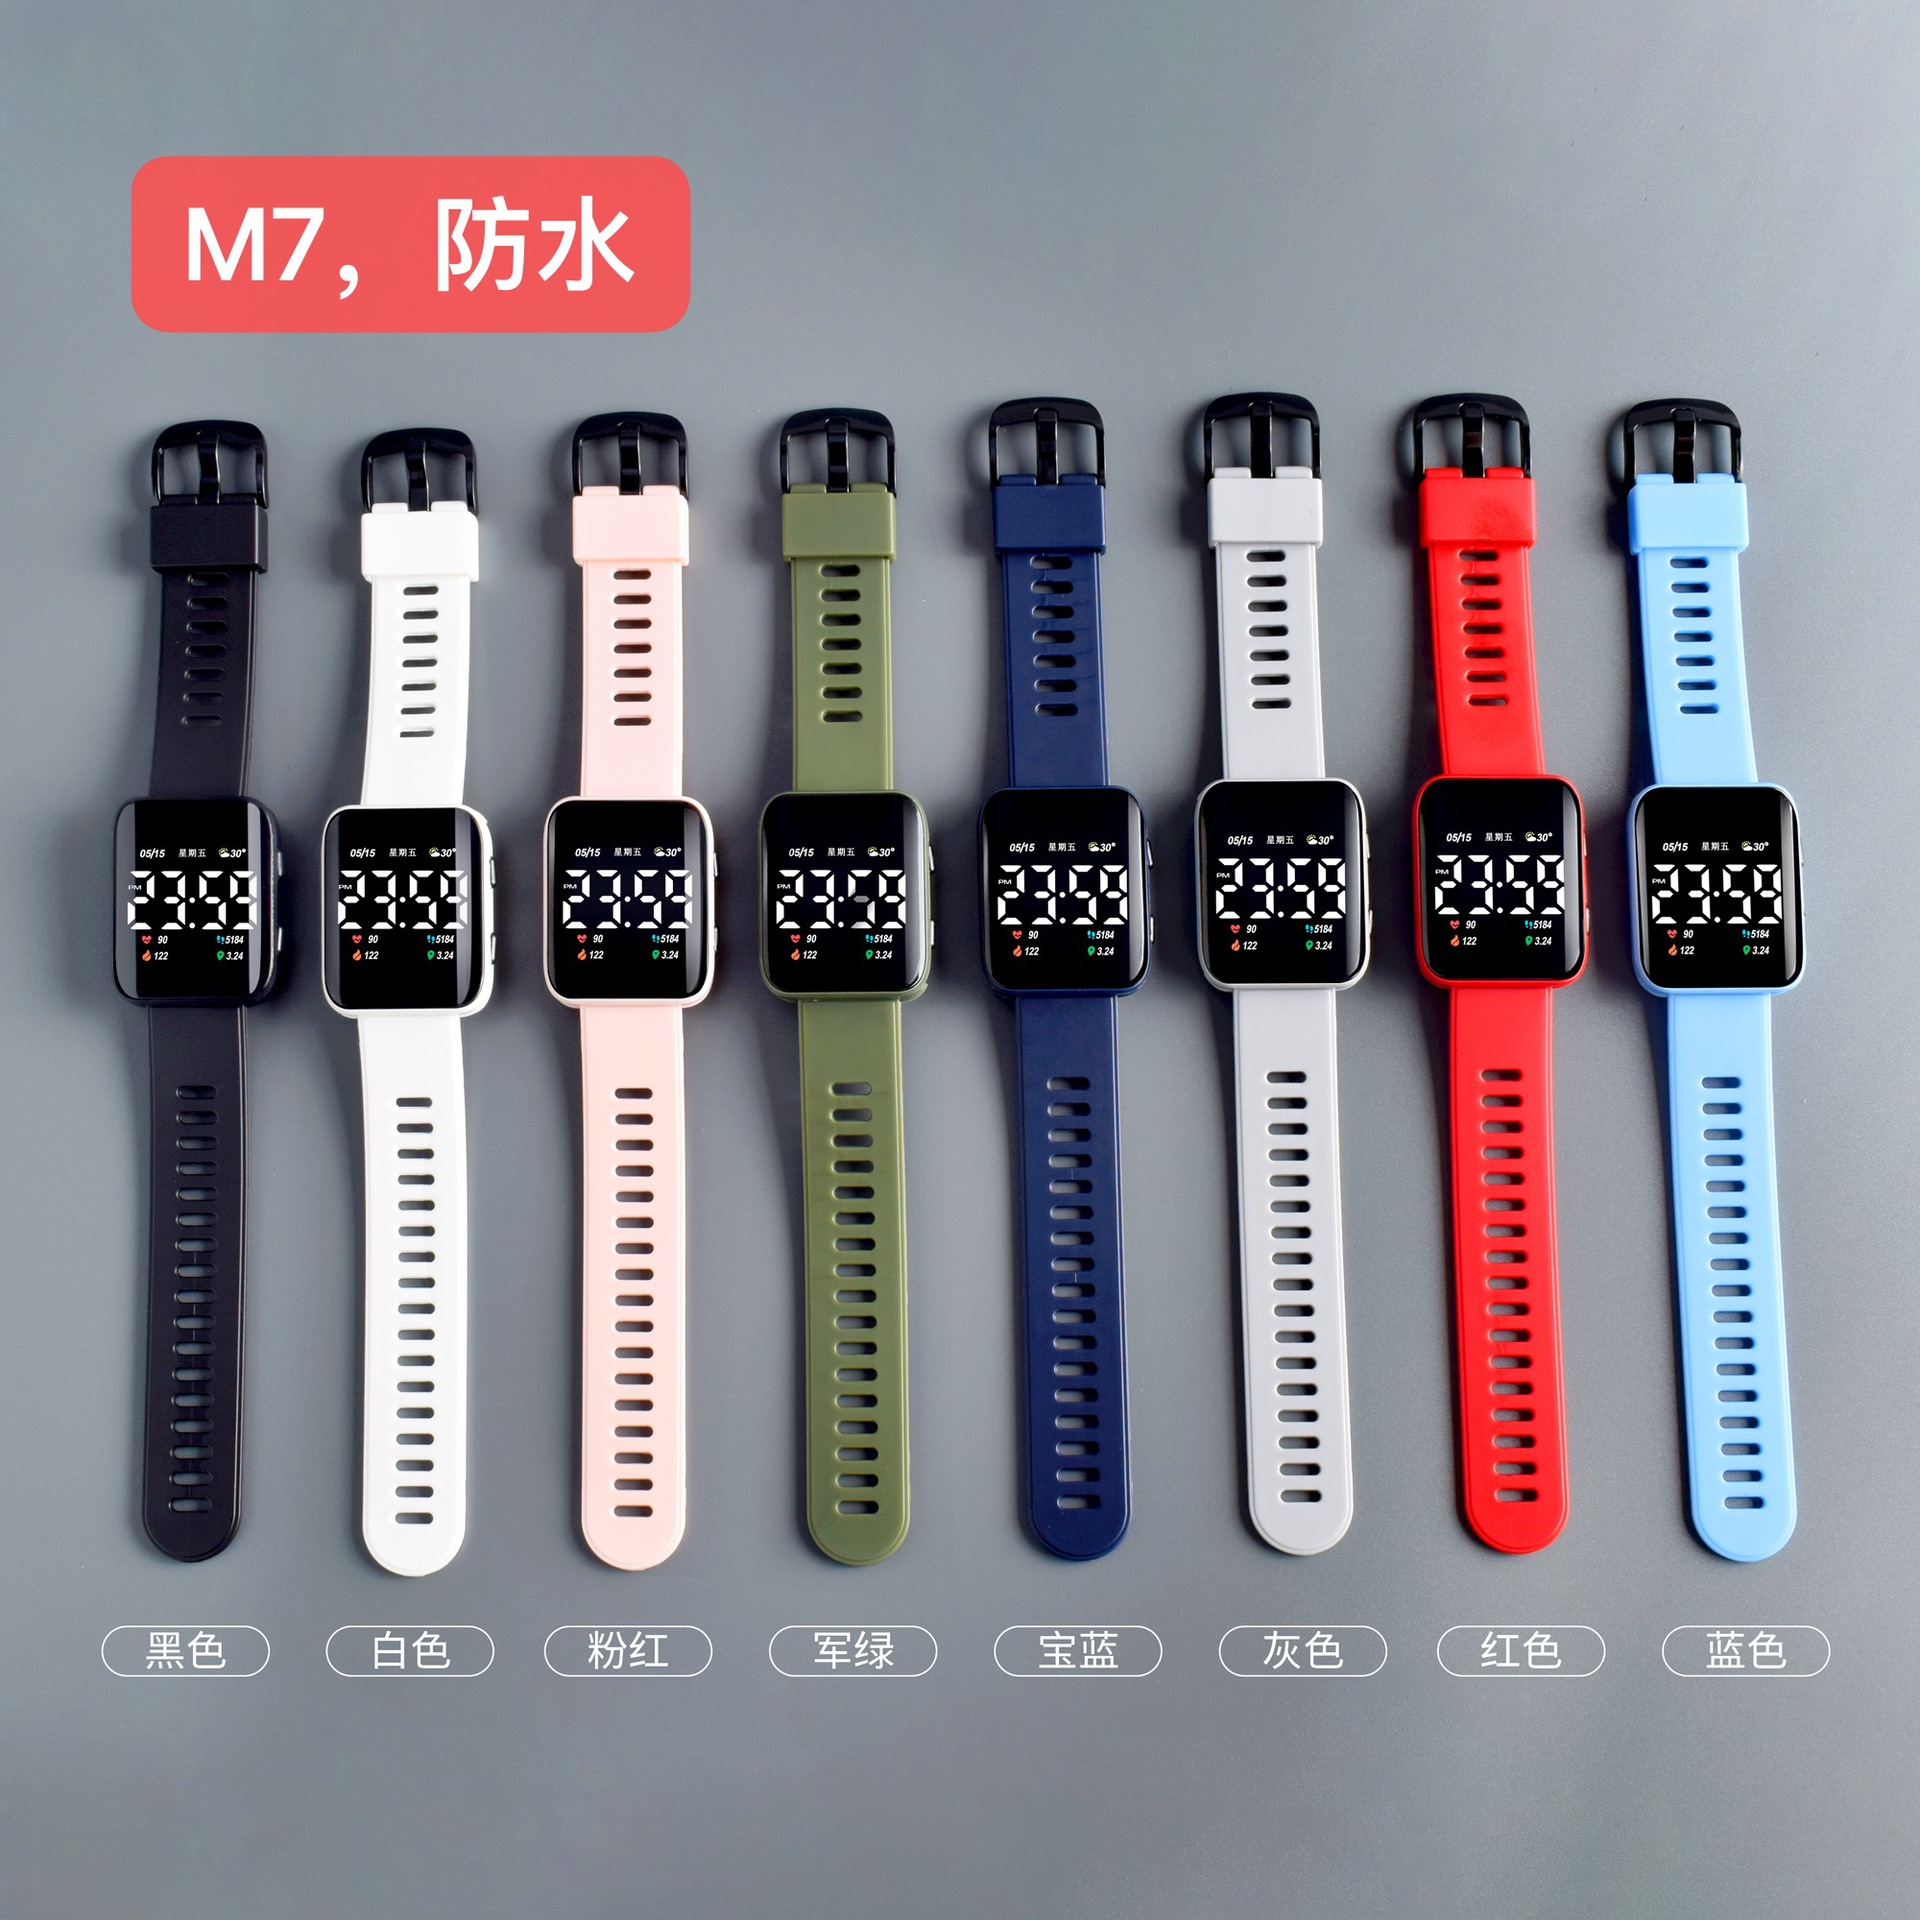 Foreign Trade Cross-Border New Arrival M7led Electronic Watch Fashion Creative All-Match Square Waterproof Sports Student Electronic Watch